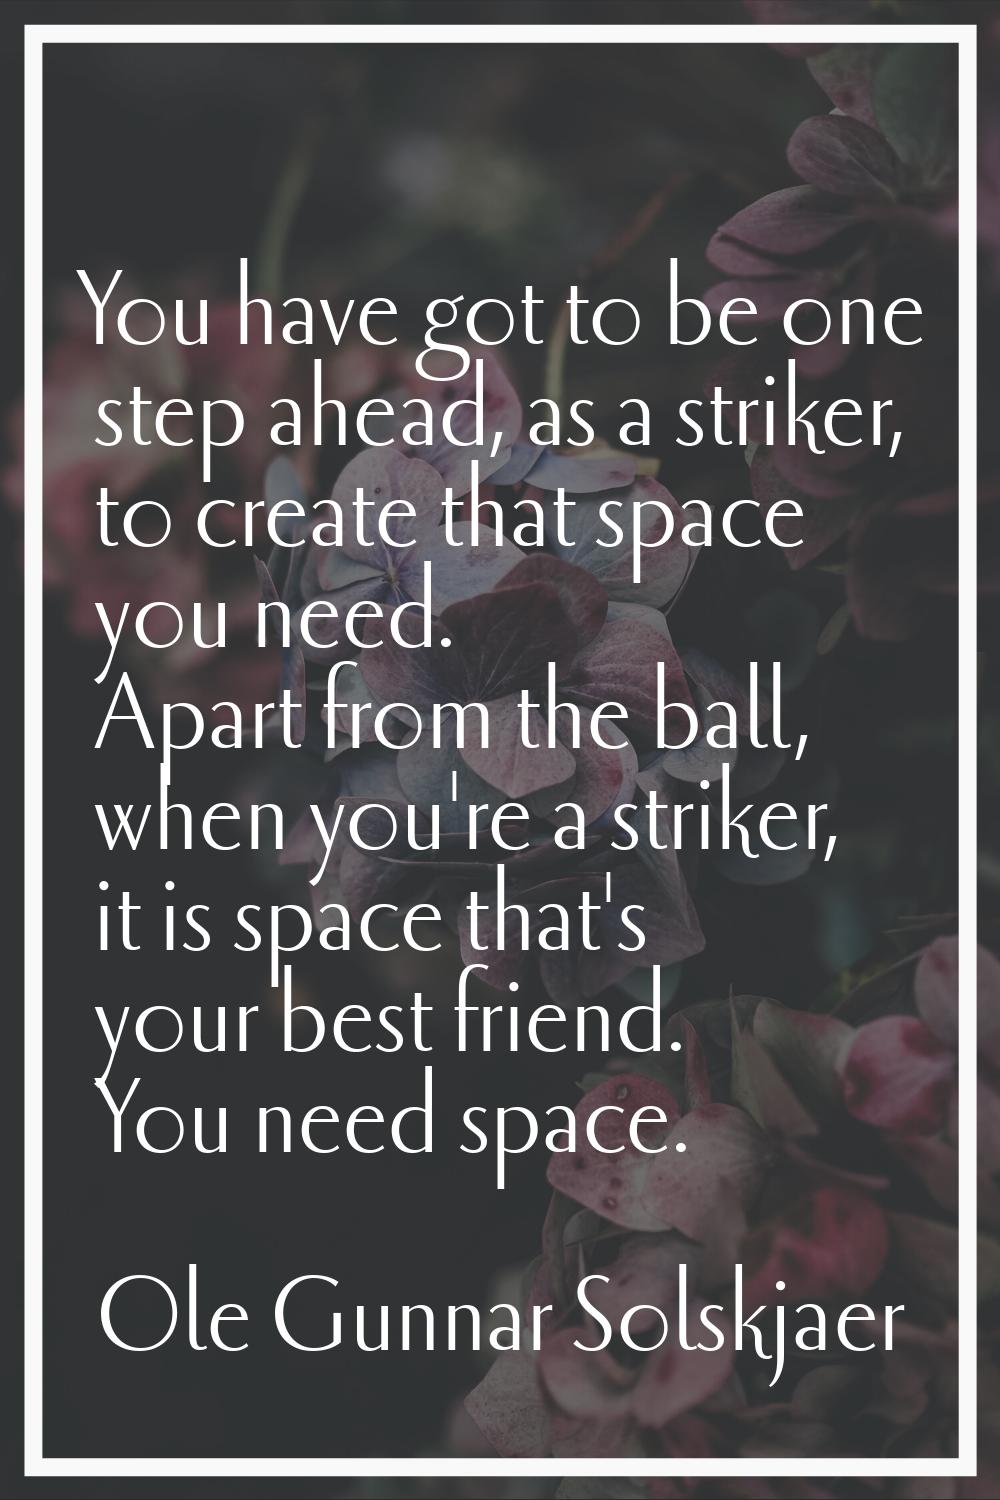 You have got to be one step ahead, as a striker, to create that space you need. Apart from the ball